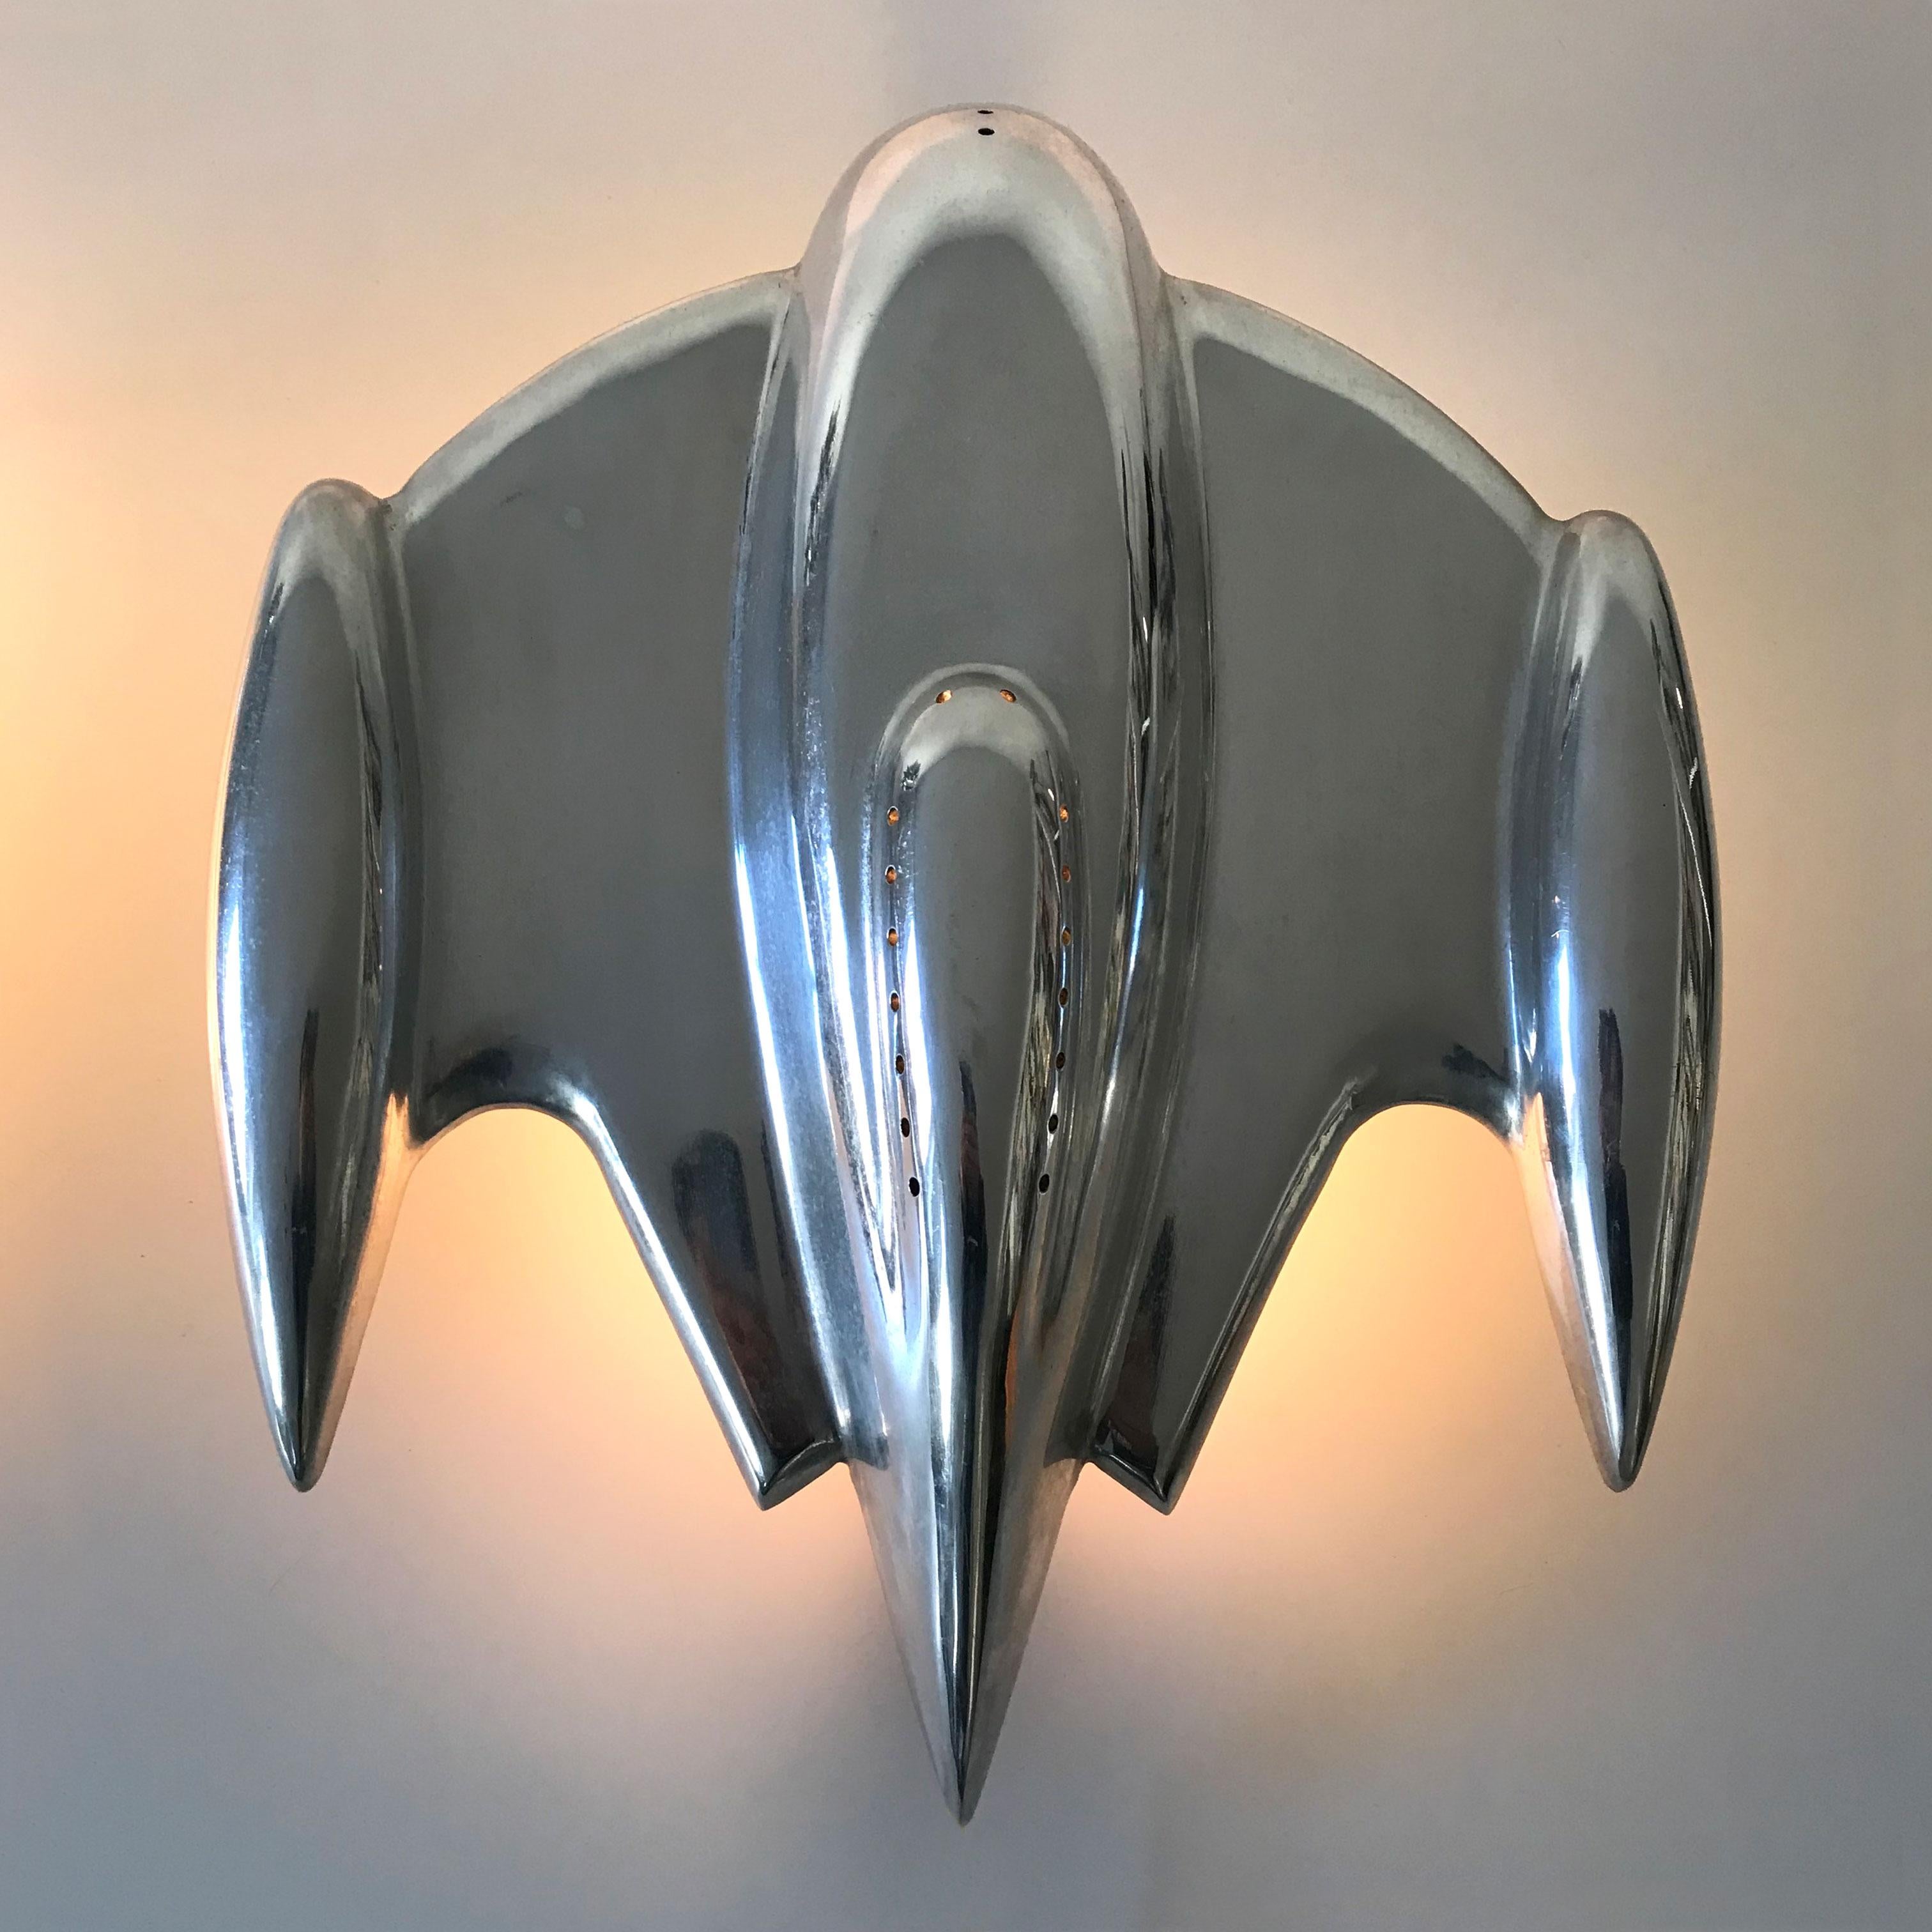 French Set of 2 Large Sputnik Spaceship Wall Lamps or Sconces, 1990s, France For Sale